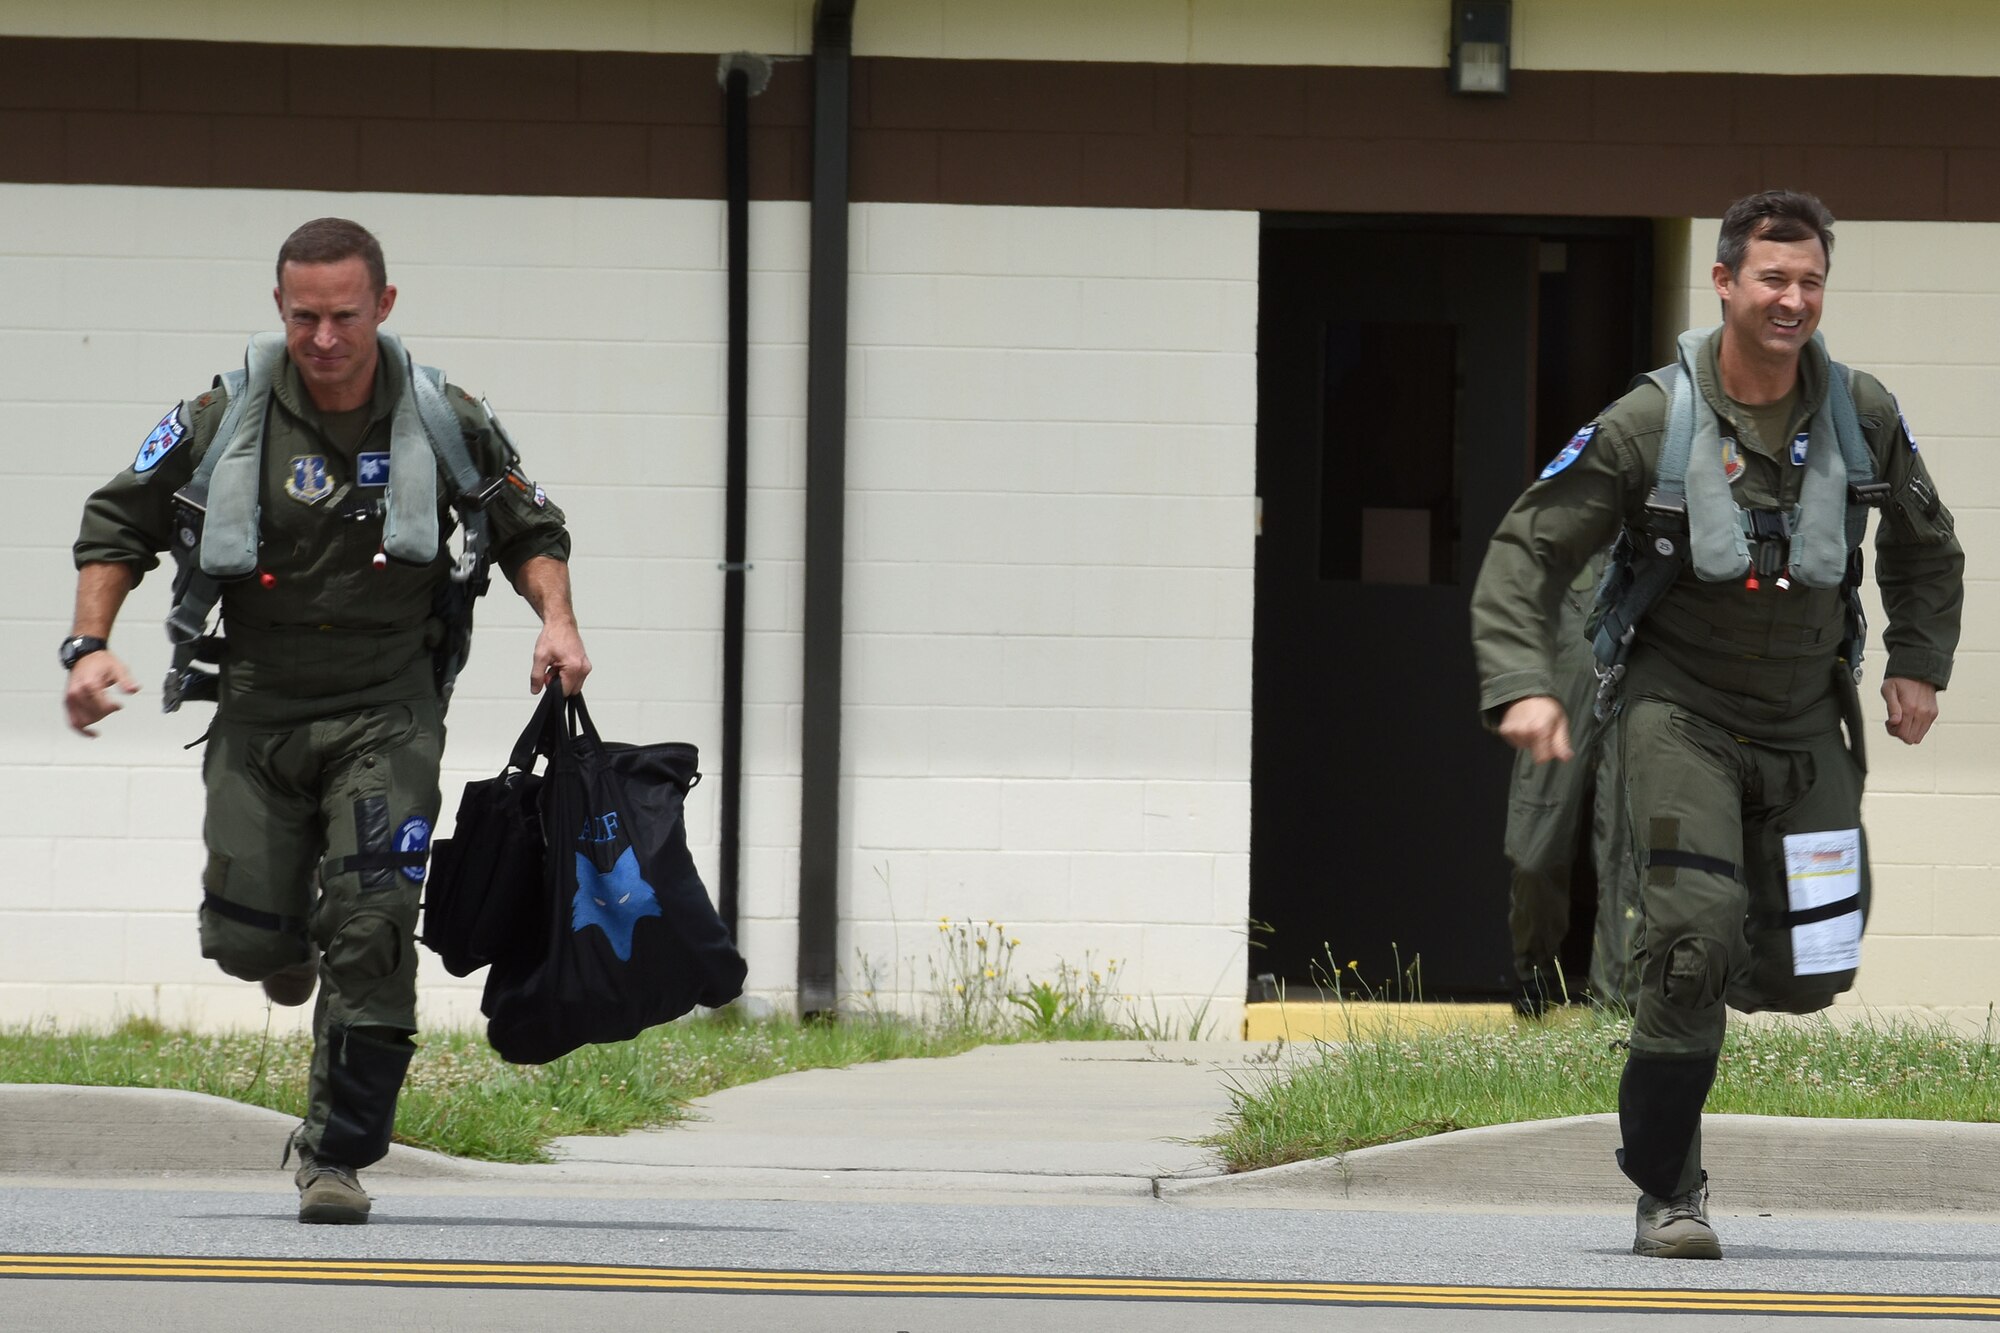 U.S. Air Force Lt. Col. Jeffrey Beckham, right, and Maj. Justin Dumais, pilots from the 169th Fighter Wing, scramble to their F-16 fighter jets for an Aerospace Control Alert training mission, June 5.The 169th FW, in close coordination with the Continental U.S. North American Aerospace Defense Command Region, the Eastern Air Defense Sector and the Federal Aviation Administration, hosted the Southeast Aerospace Control Alert Conference at McEntire Joint National Guard Base, S.C., June 5-7. The conference was a total team-training initiative to improve homeland-defense capabilities by developing techniques with joint forces during small-scale exercises. This conference consisted of South Carolina Air National Guard 169th FW F-16 fighter jets, U.S. Coast Guard Rotary Wing Air Intercept Squadron MH-65D Dolphin helicopters from USCG Air Station Atlantic City, and South Carolina Wing Civil Air Patrol aircraft and crews to hone their skills with tactical-level air-intercept procedures. (U.S. Air National Guard photo by Senior Master Sgt. Edward Snyder)